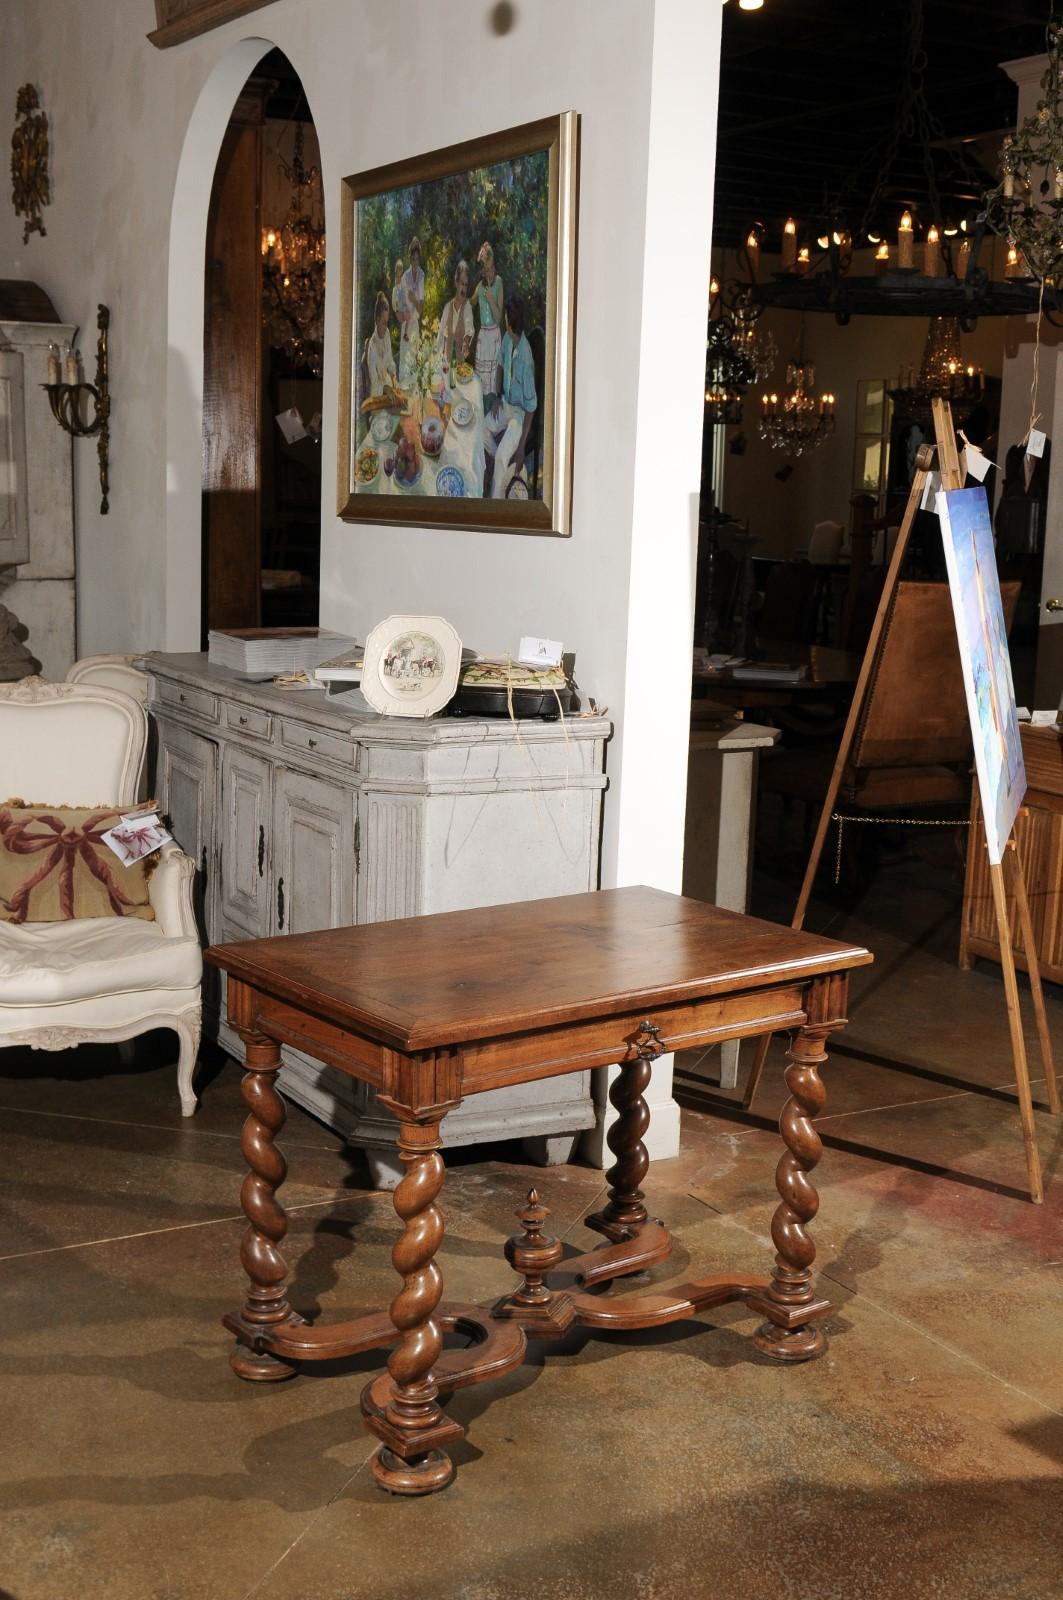 A French Louis XIII style walnut table from the early 19th century, with barley-twist legs, single drawer and X-form cross stretcher. Born in France during the Napoleonic era, this exquisite table presents the stylistic characteristics of the Louis